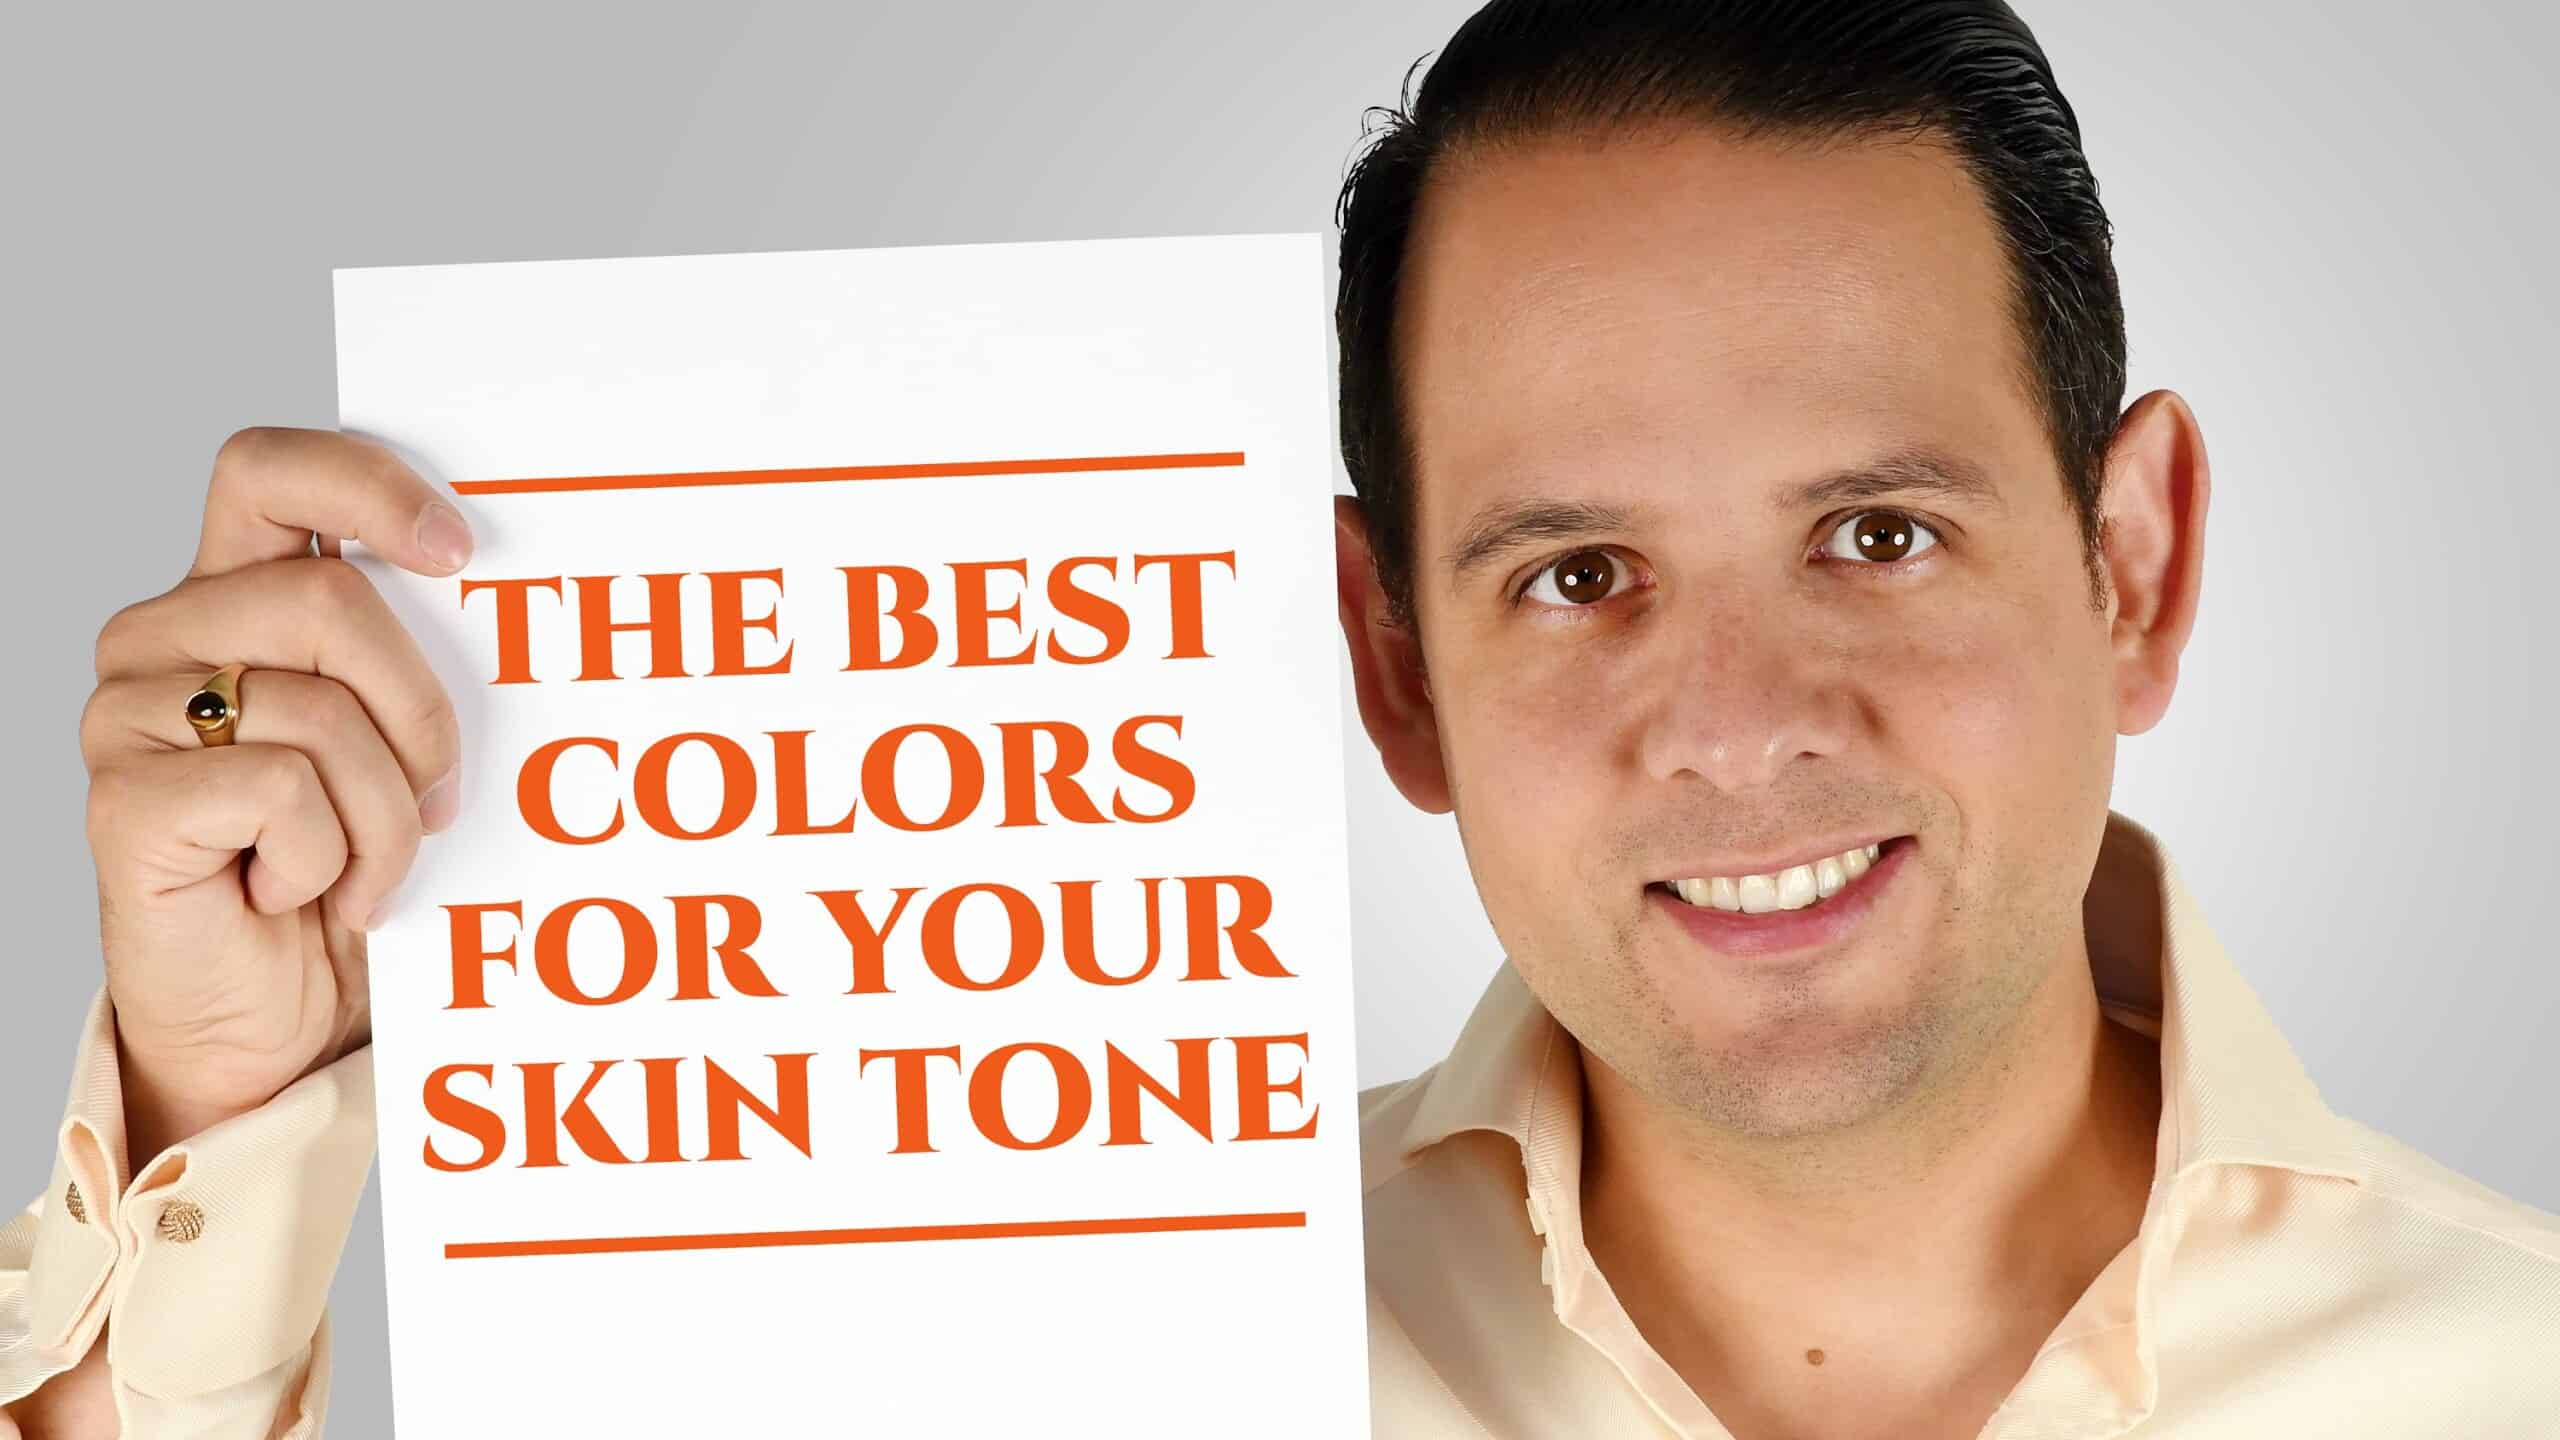 How To Find The Right Colors For Your Skintone